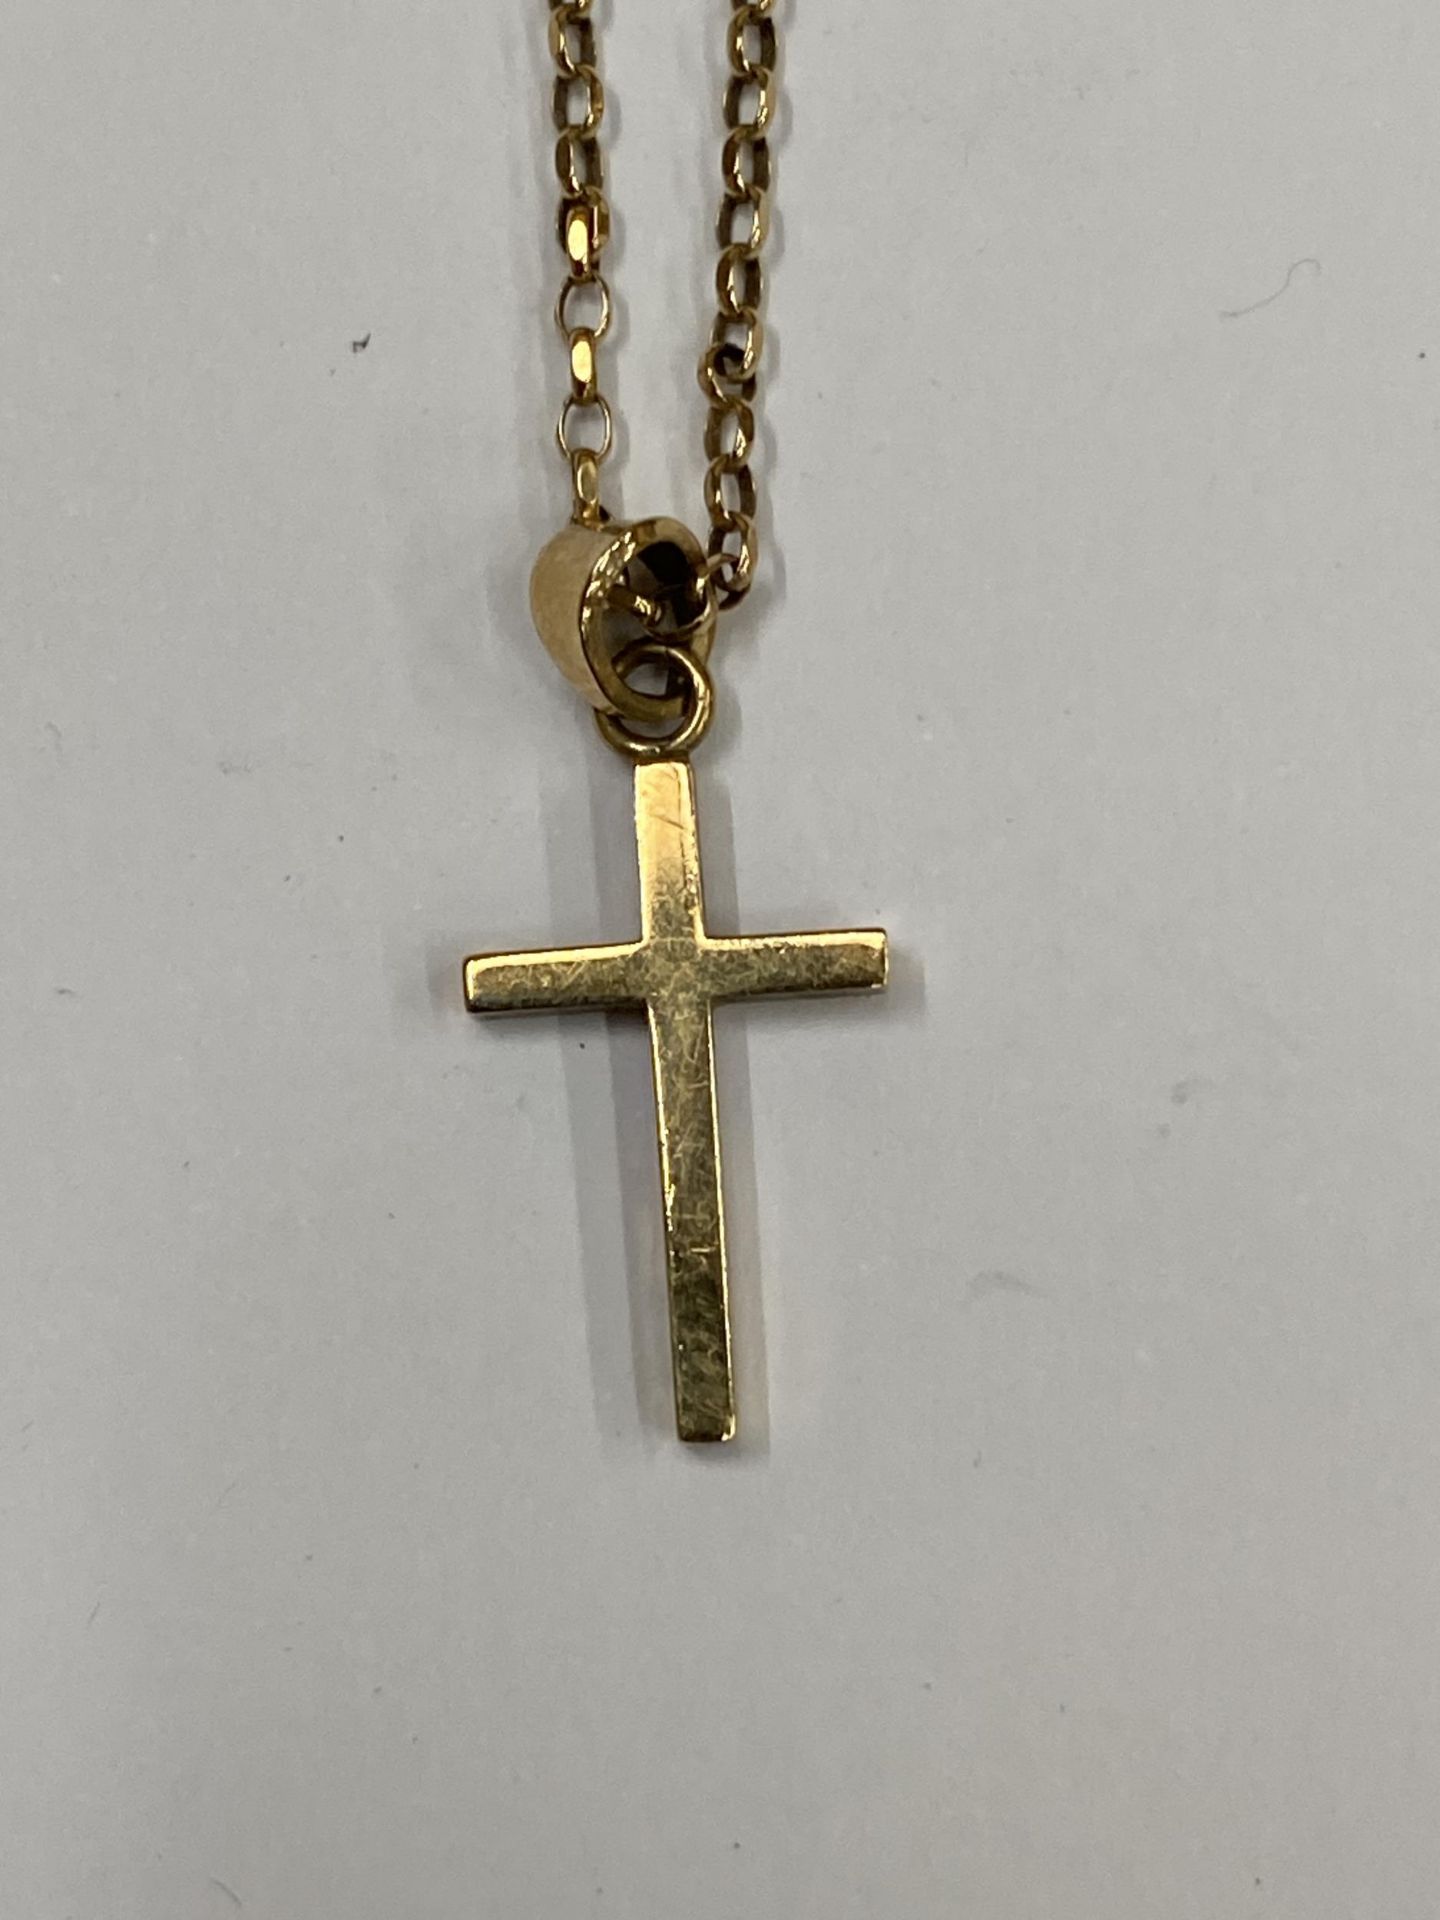 A 9CT YELLOW GOLD NECKLACE WITH CROSS PENDANT, TOTAL WEIGHT 2.96G - Image 2 of 3